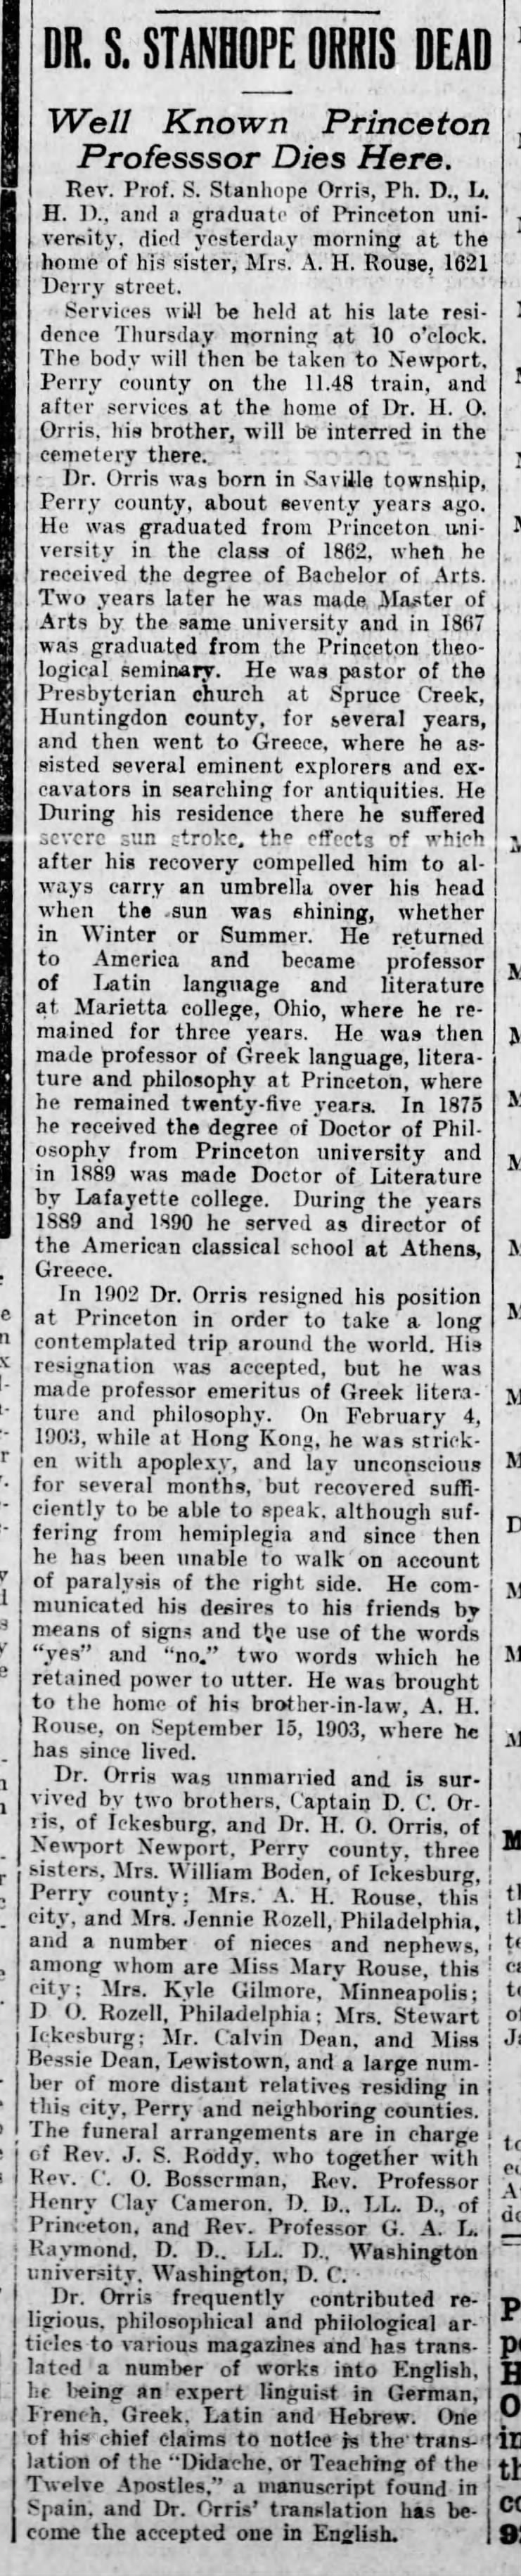 1905-12-18 Harrisburg Daily Independent, p5-obituary of Stanhope Orris